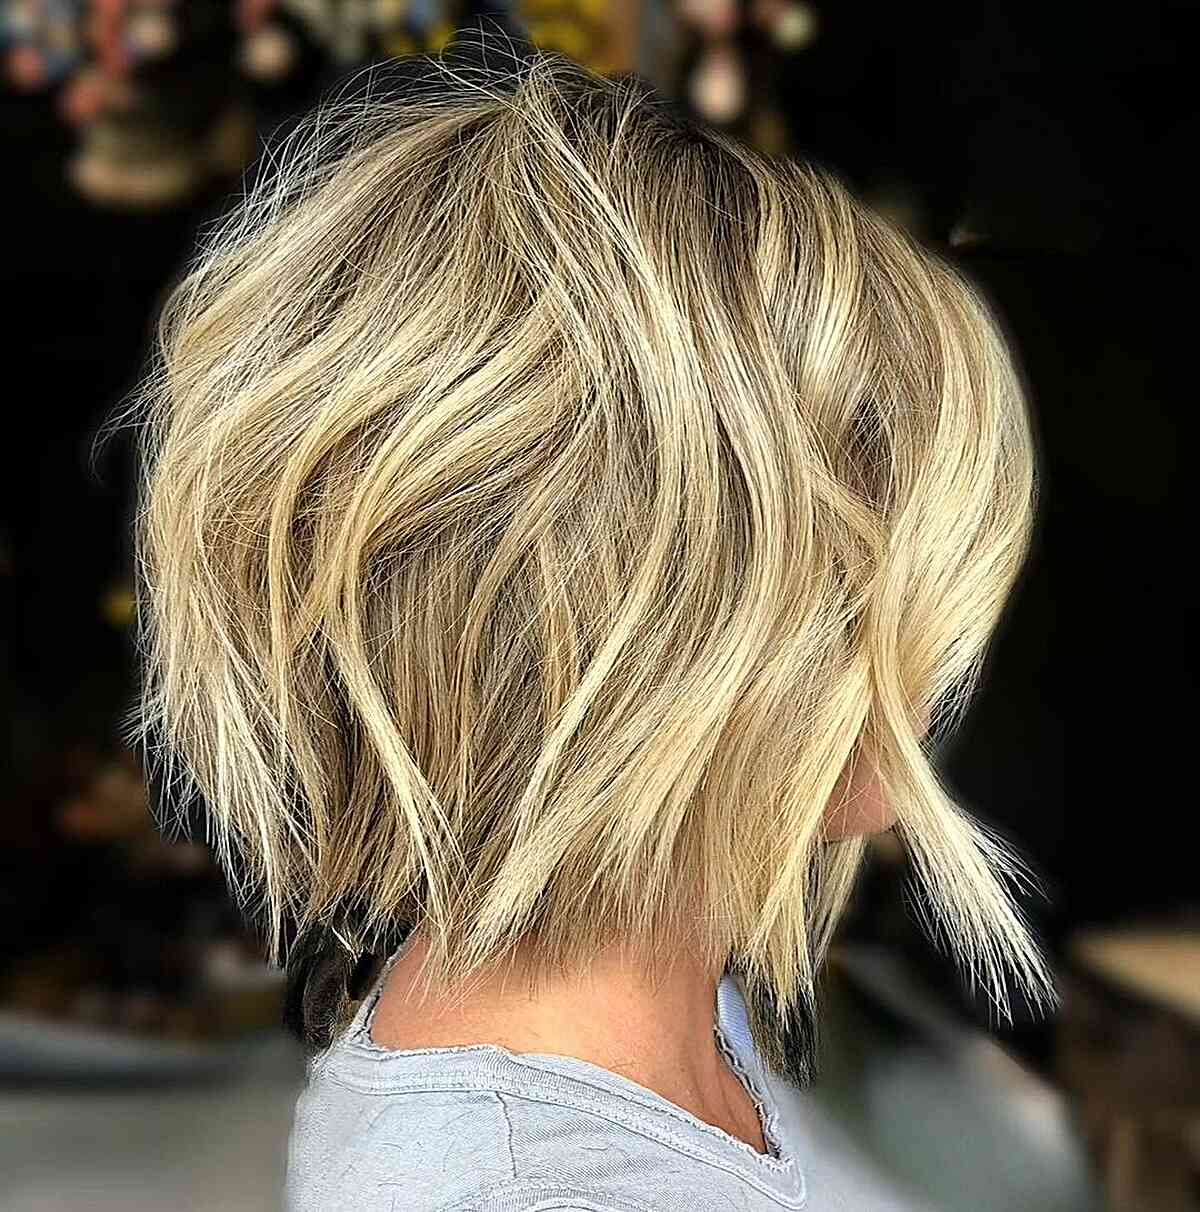 Short Blonde Bobbed Hair with Shattered Choppy Ends